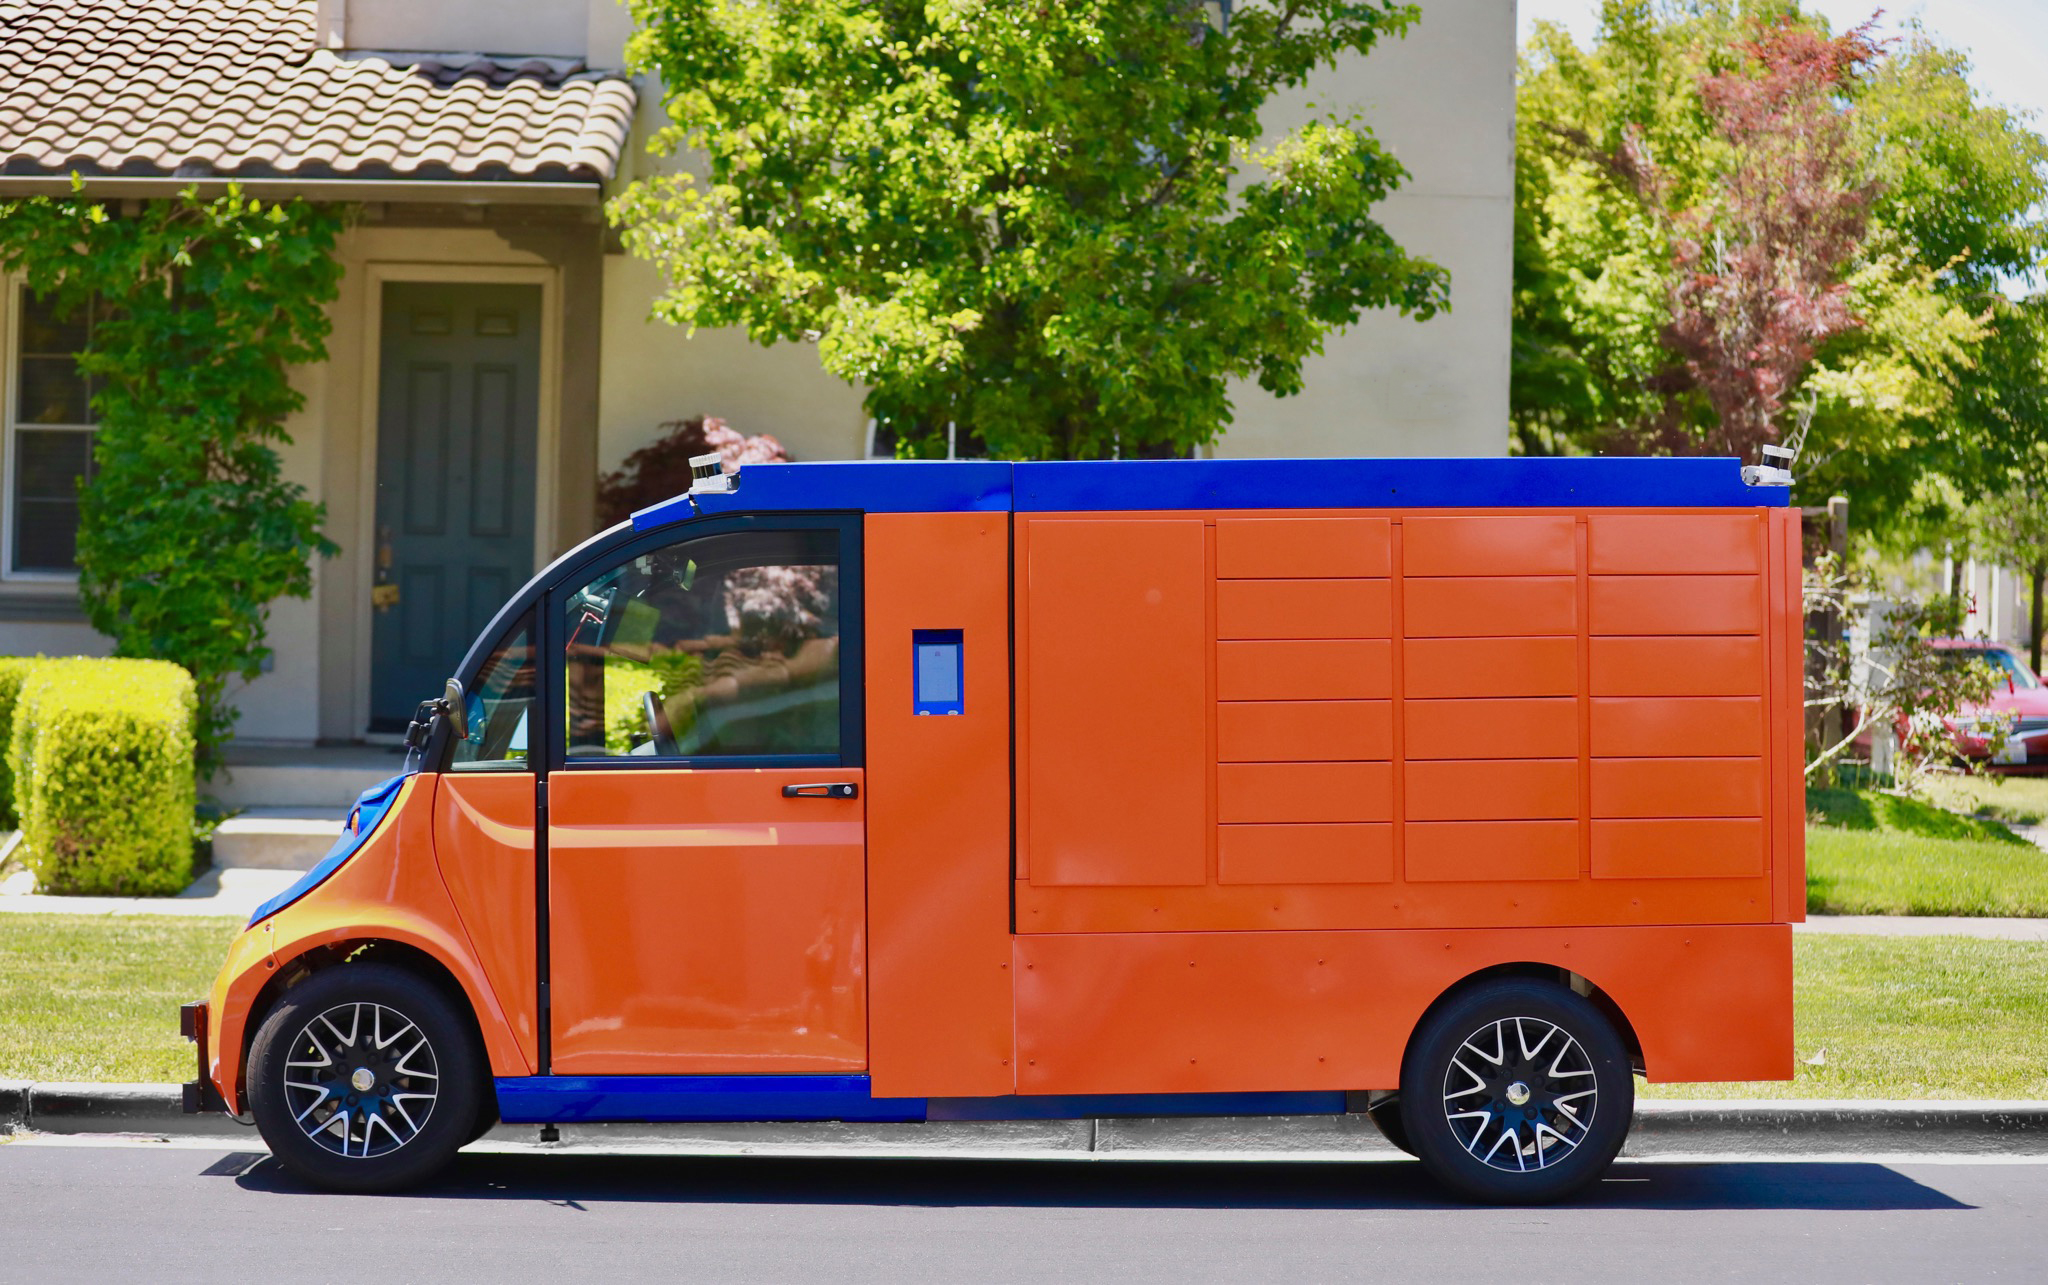 A new self-driving electric vehicle developed by Boxbot, an Oakland, California startup founded by veterans of Uber and Tesla. Boxbot's vehicle will be used for parcel delivery starting this year.